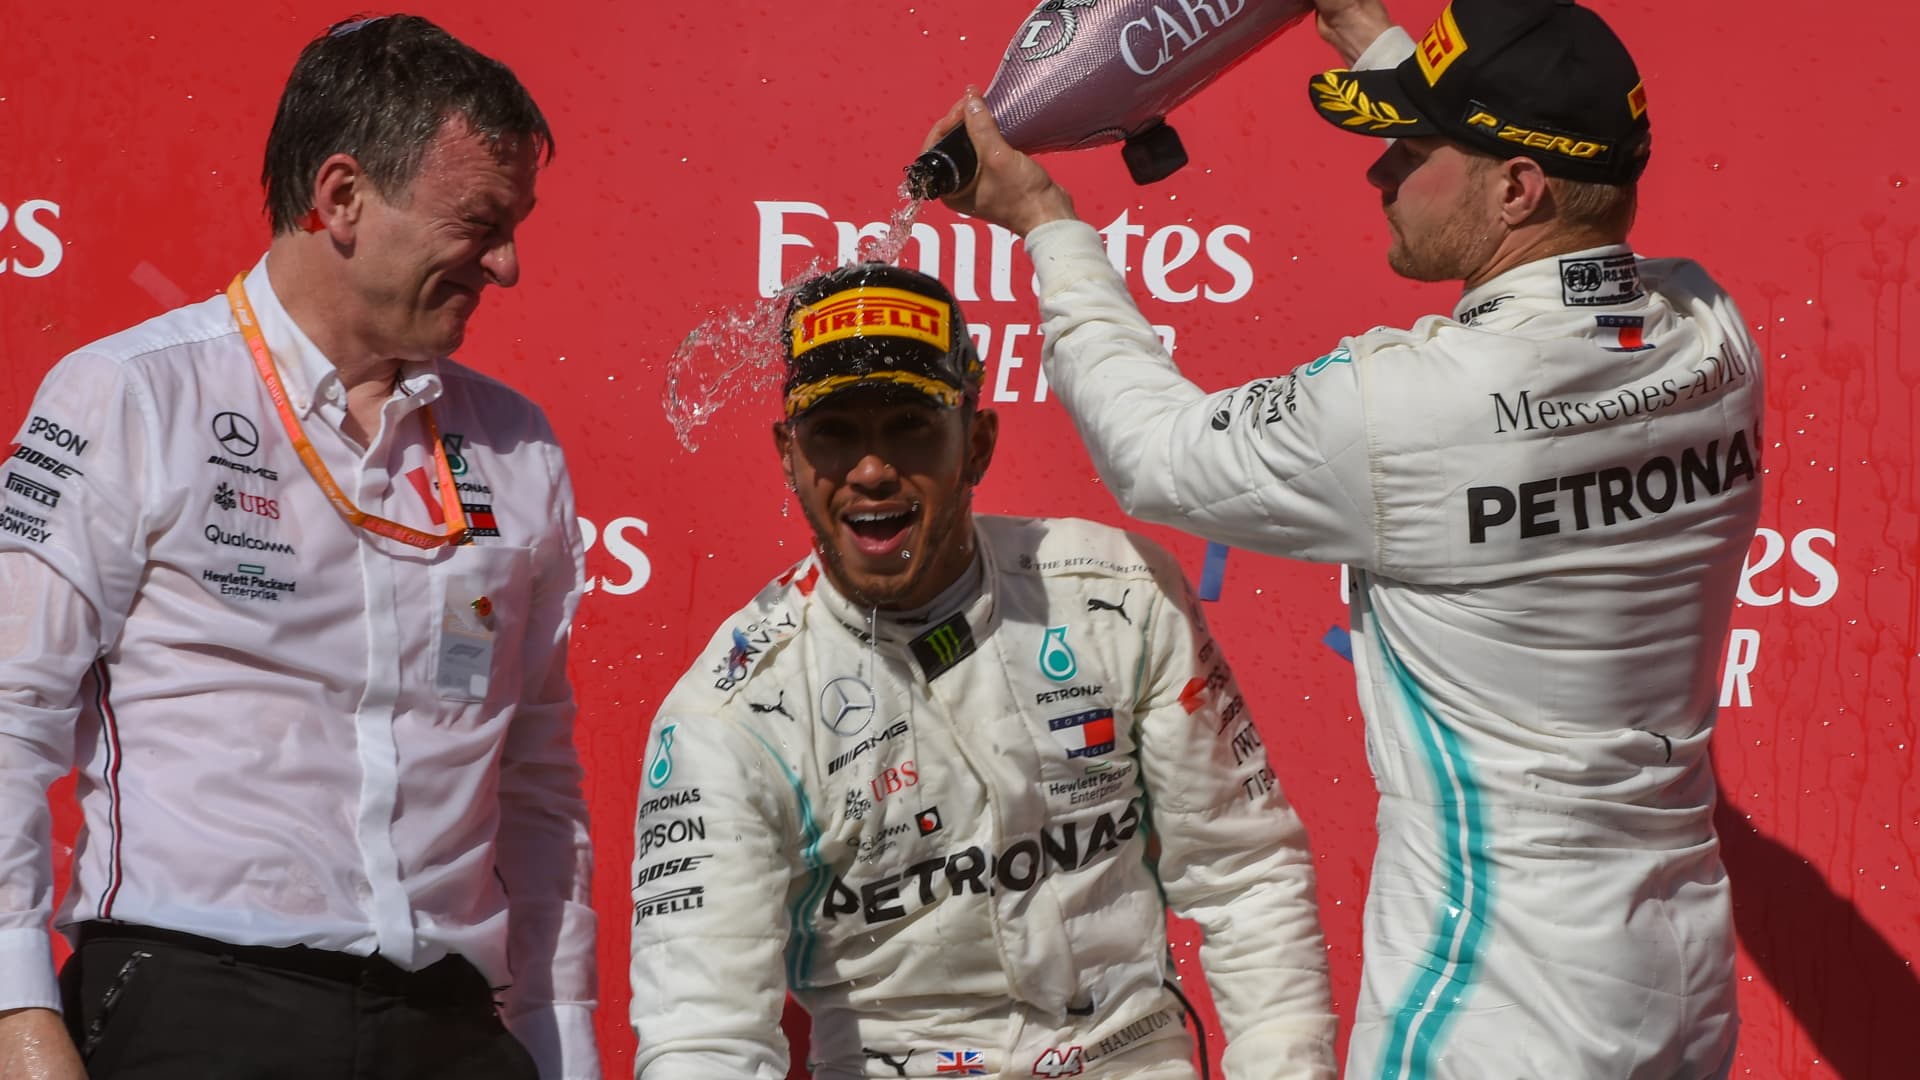 Teammate Mercedes AMG Petronas Motorsport driver Valtteri Bottas (77) of Finland pours champagne on the head of Mercedes AMG Petronas Motorsport driver Lewis Hamilton (44) of Great Britain after clinching the 2019 FIA Formula 1 World Championship following the F1 - U.S. Grand Prix race at Circuit of The Americas on November 3, 2019 in Austin, Texas.